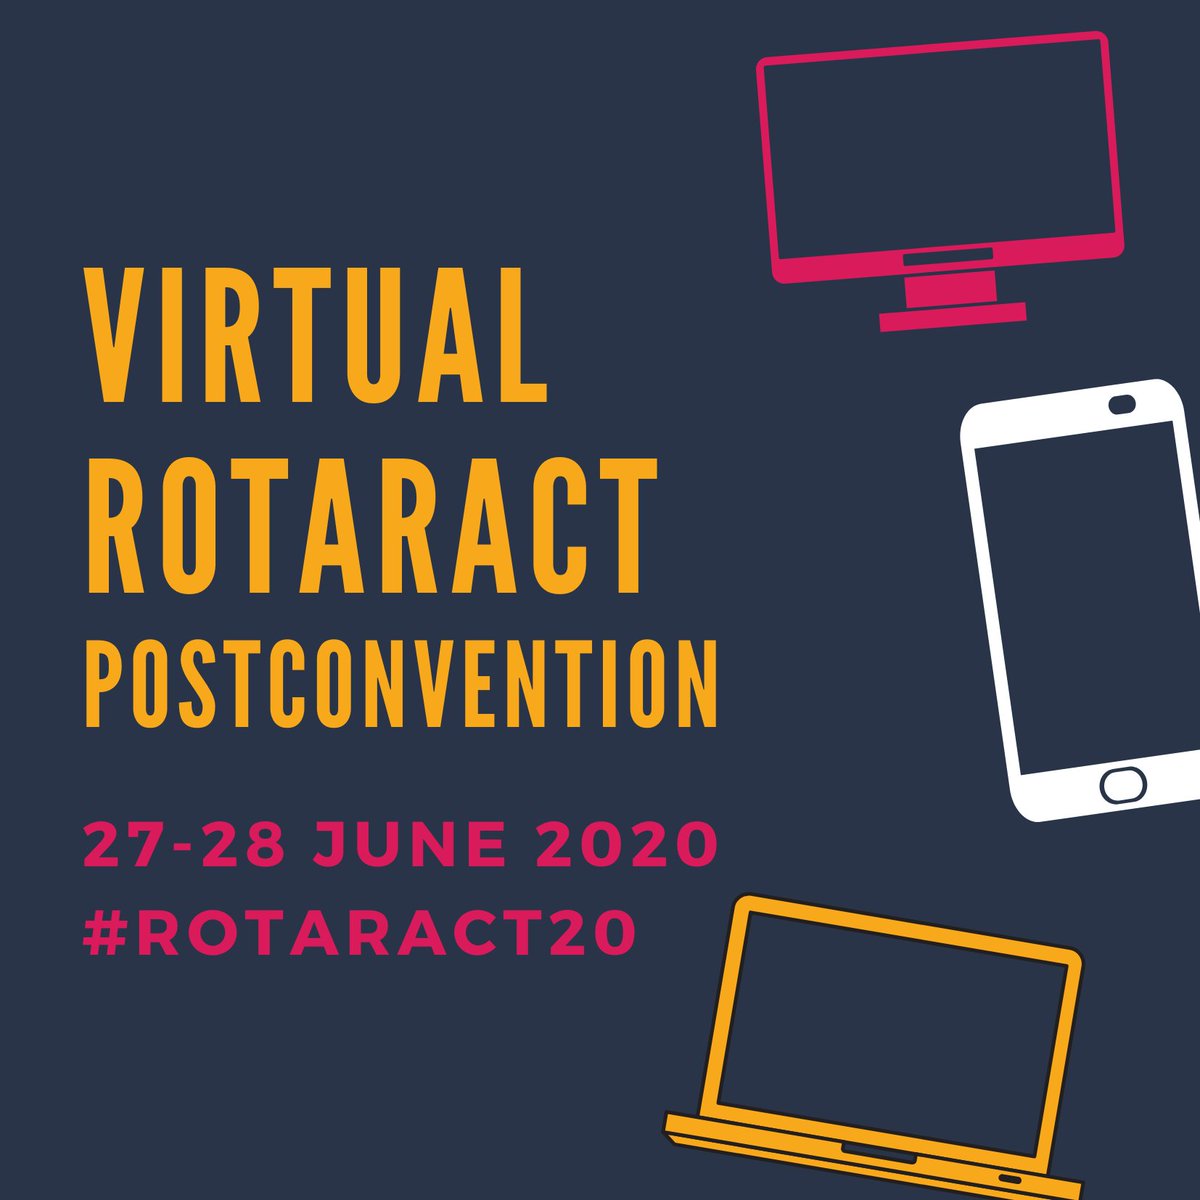 The @rotaract Post Convention starts today at 08:00 Chicago time. Tune in to hear from #Rotary leaders and fellow members on the recent changes to Rotaract and engage in exciting breakout sessions. on.rotary.org/2020rotaractpo… #Rotaract20